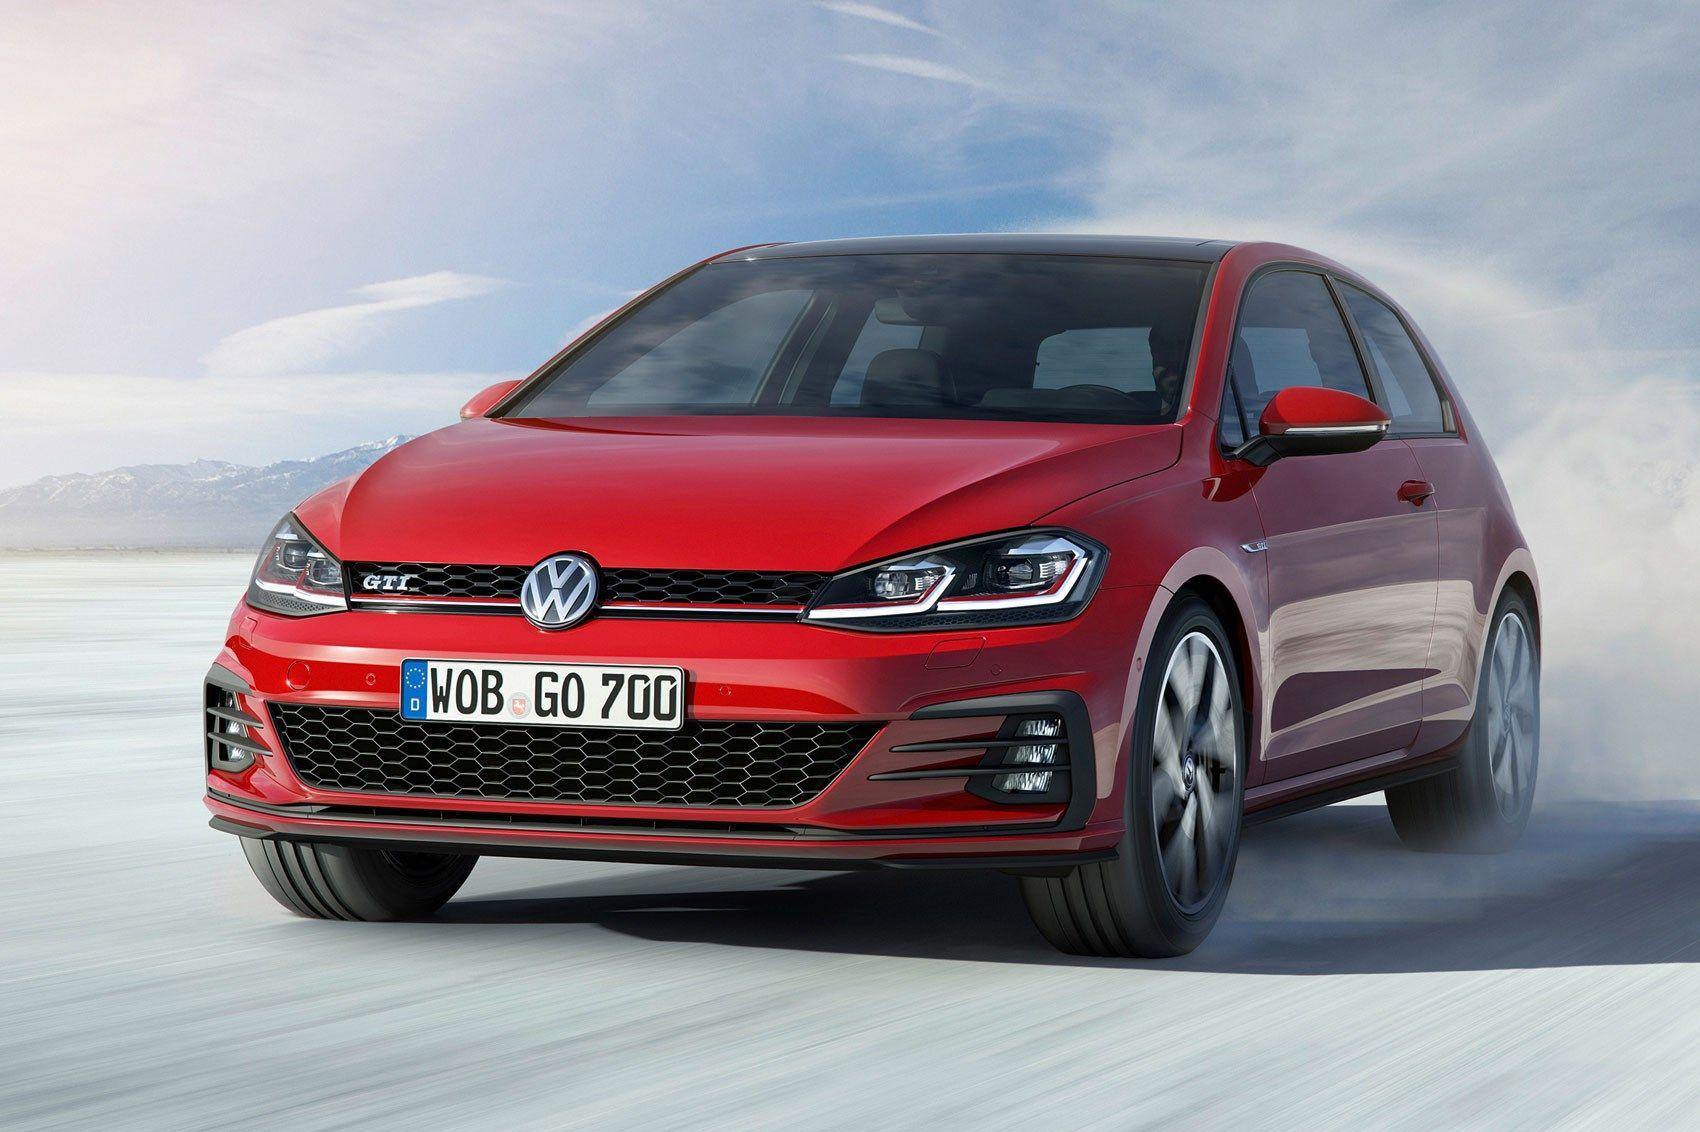 VW GTI LED Logo - Seven things you need to know about the facelifted 2017 VW Golf